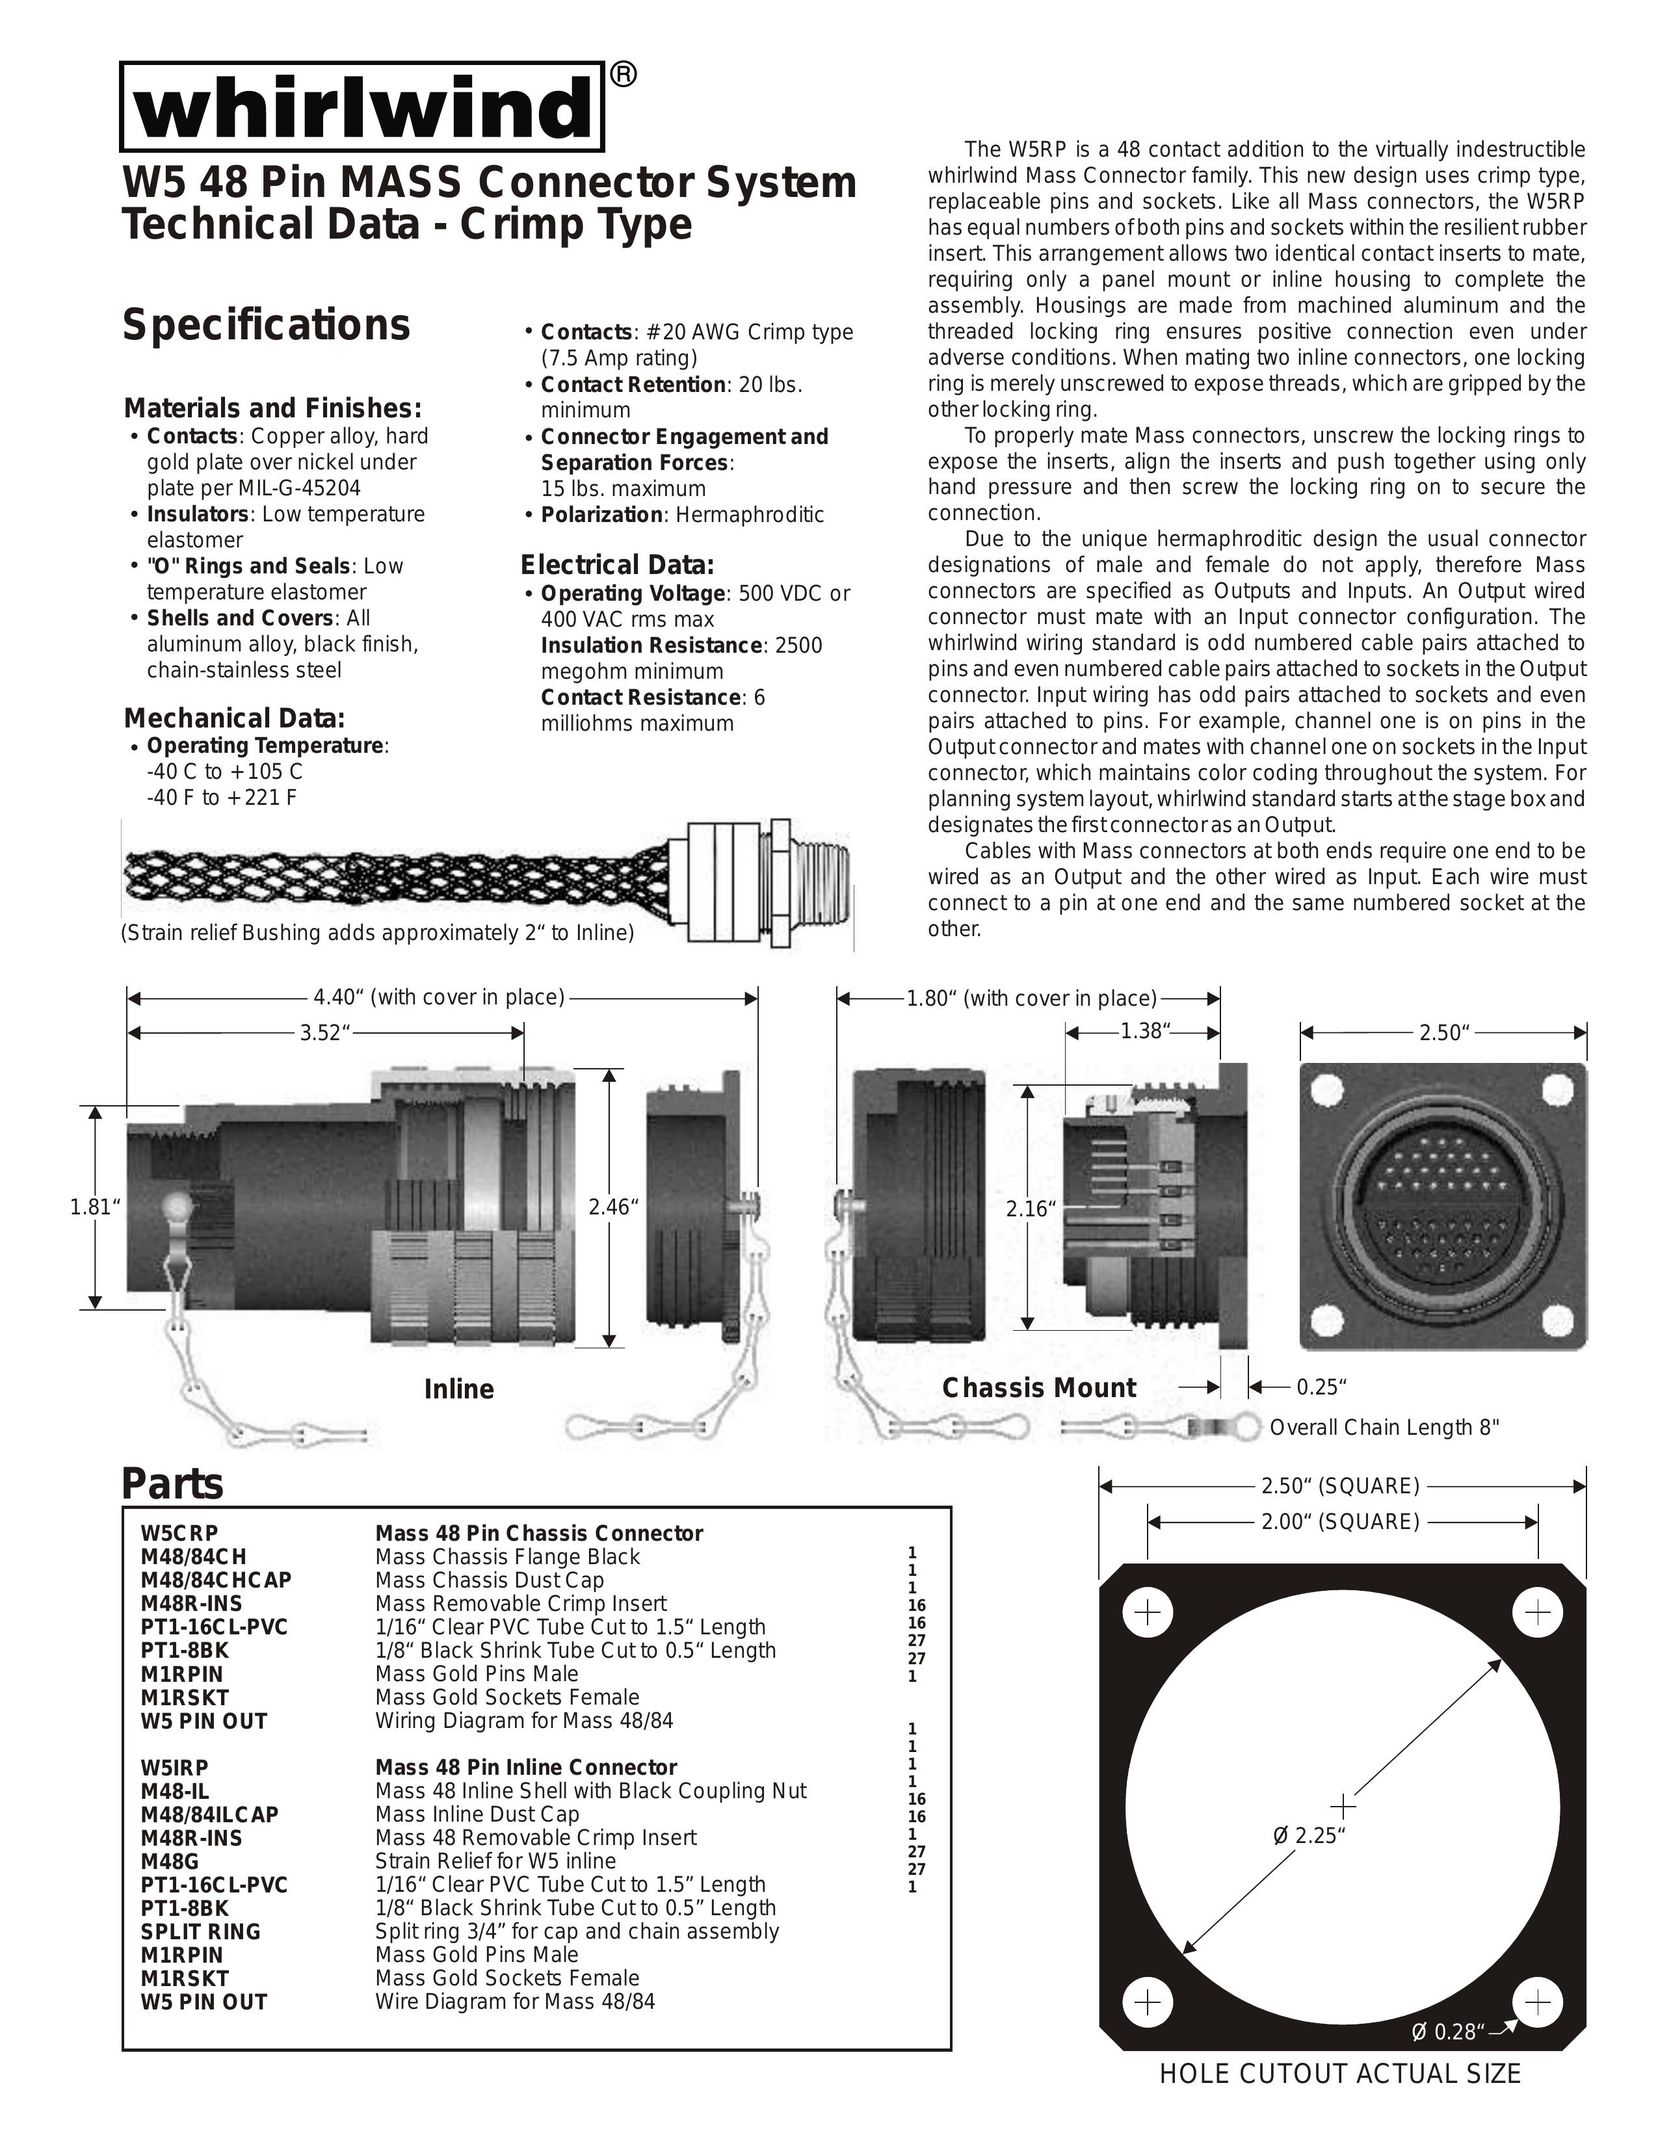 Whirlwind W5 48 TV Cables User Manual